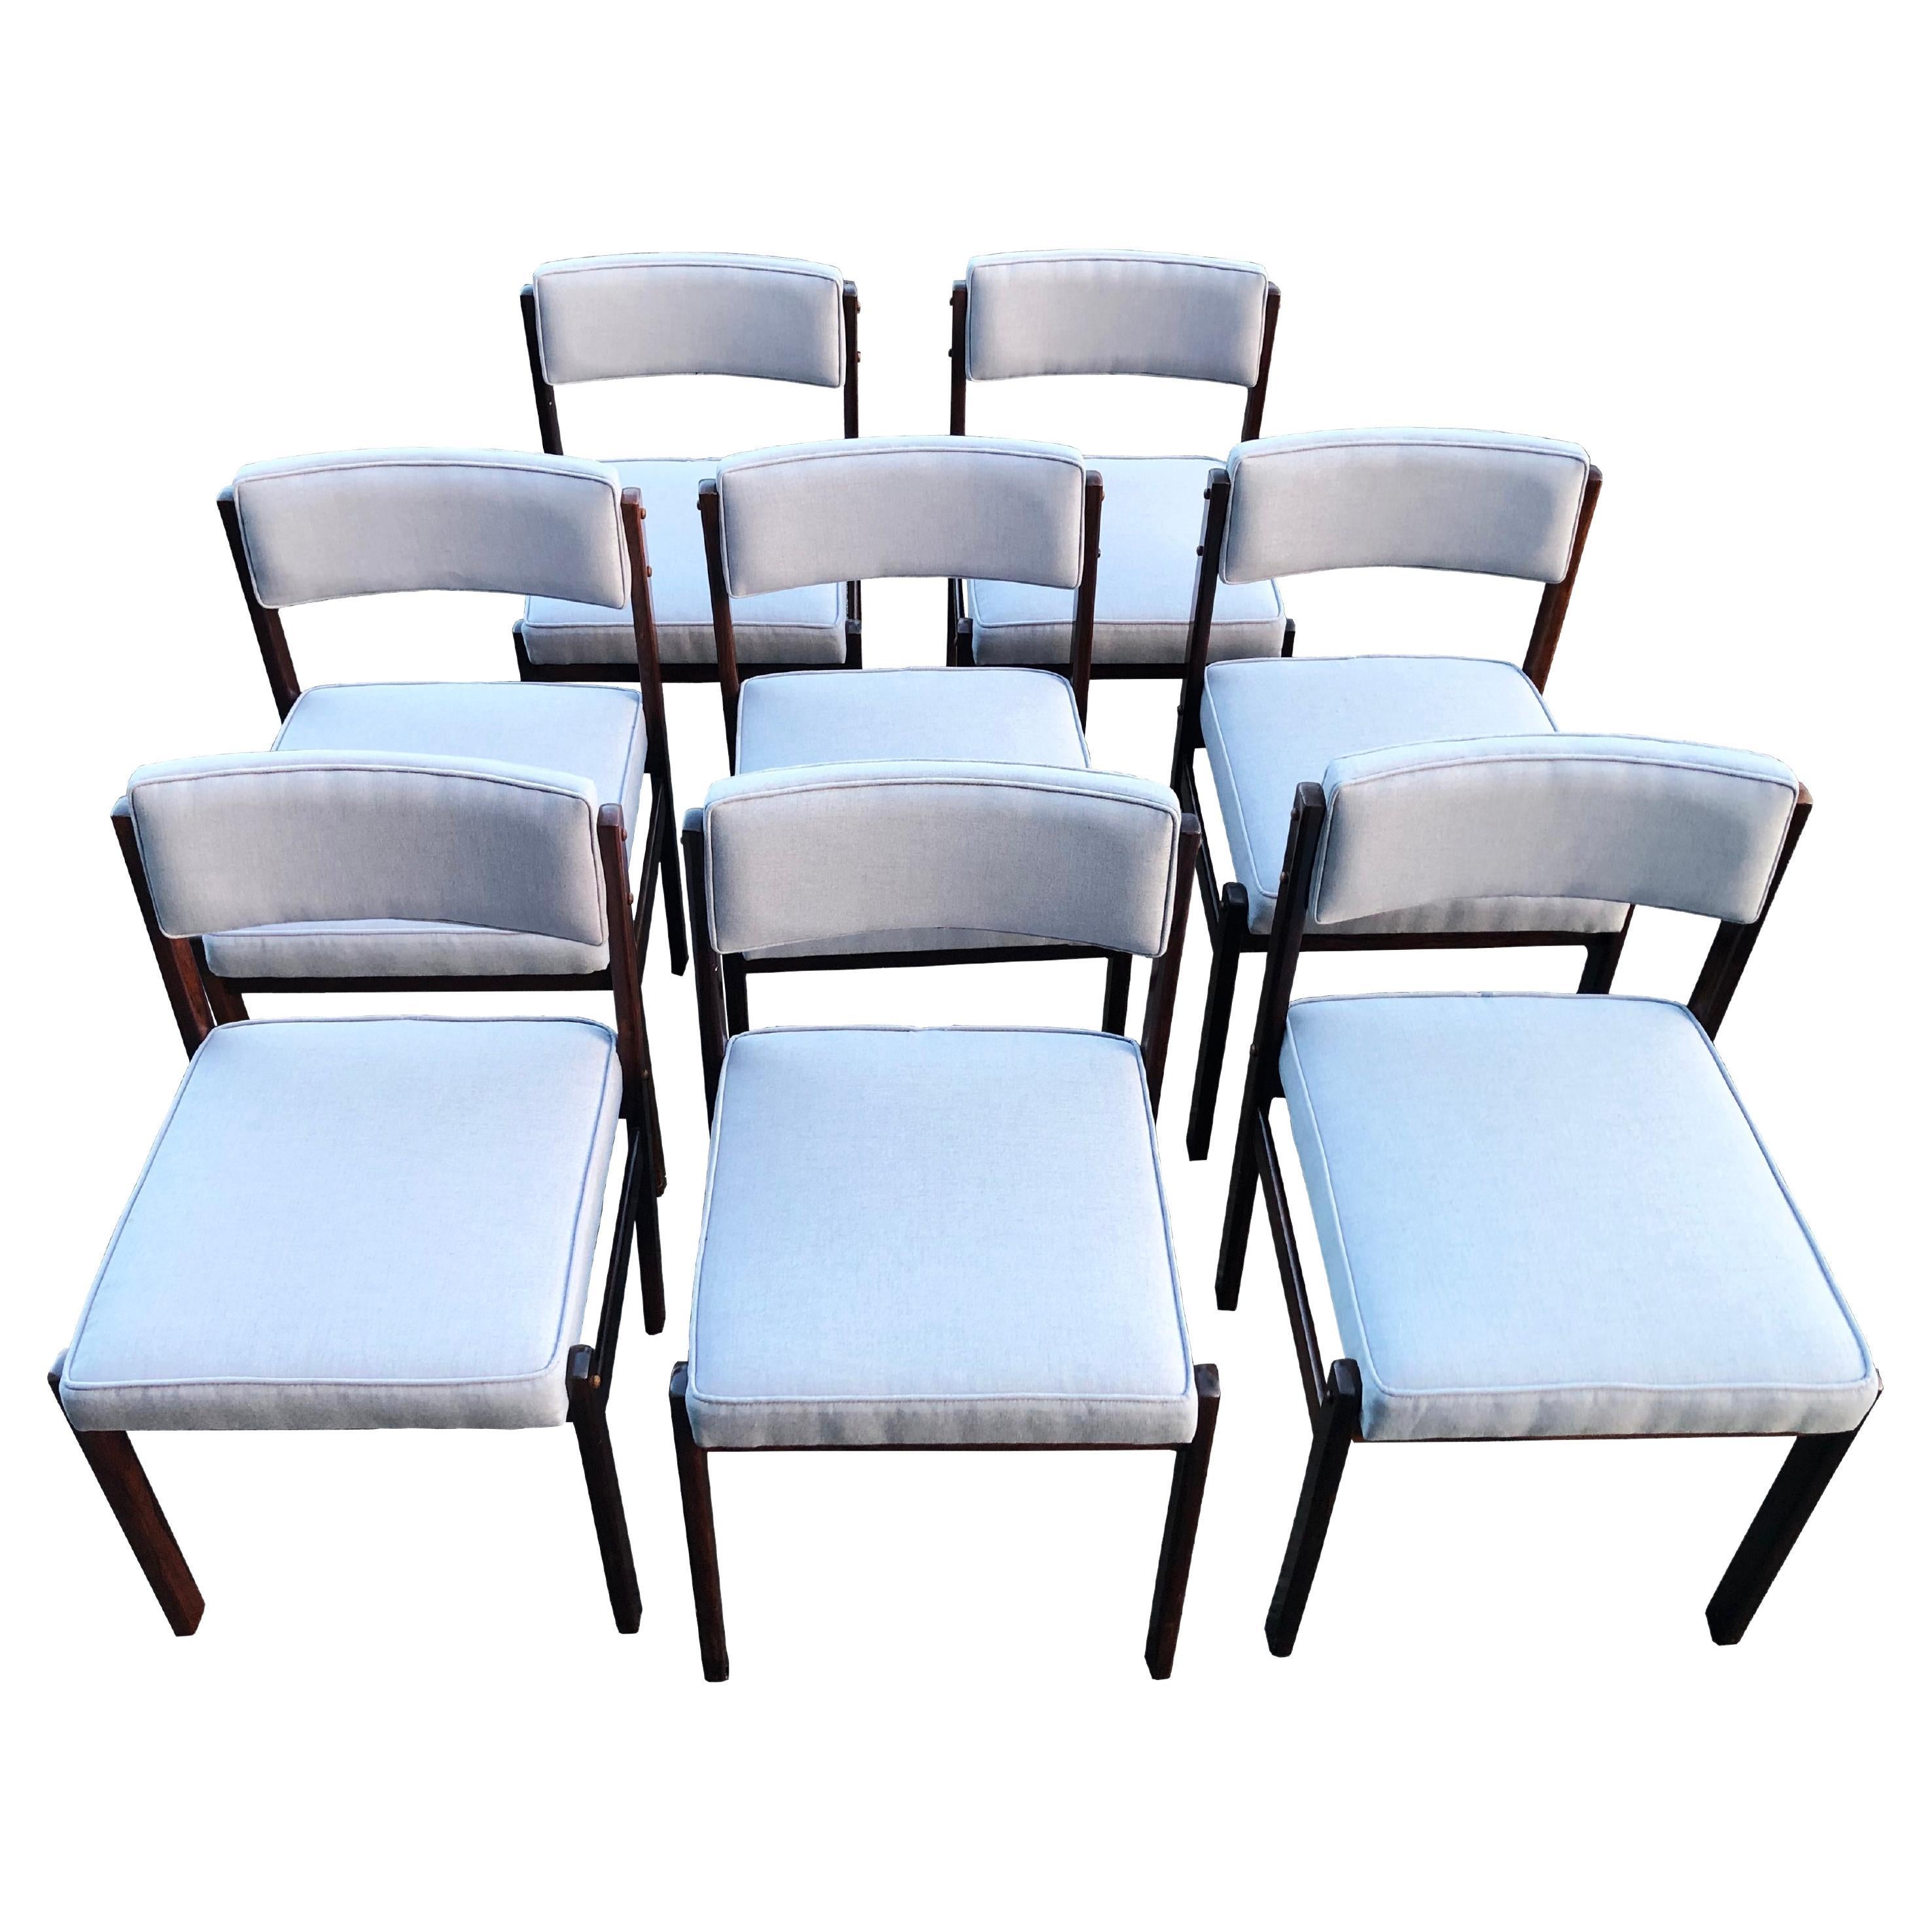 Set of 8 "Tião" Chairs, by Sergio Rodrigues, Brazil, 1959